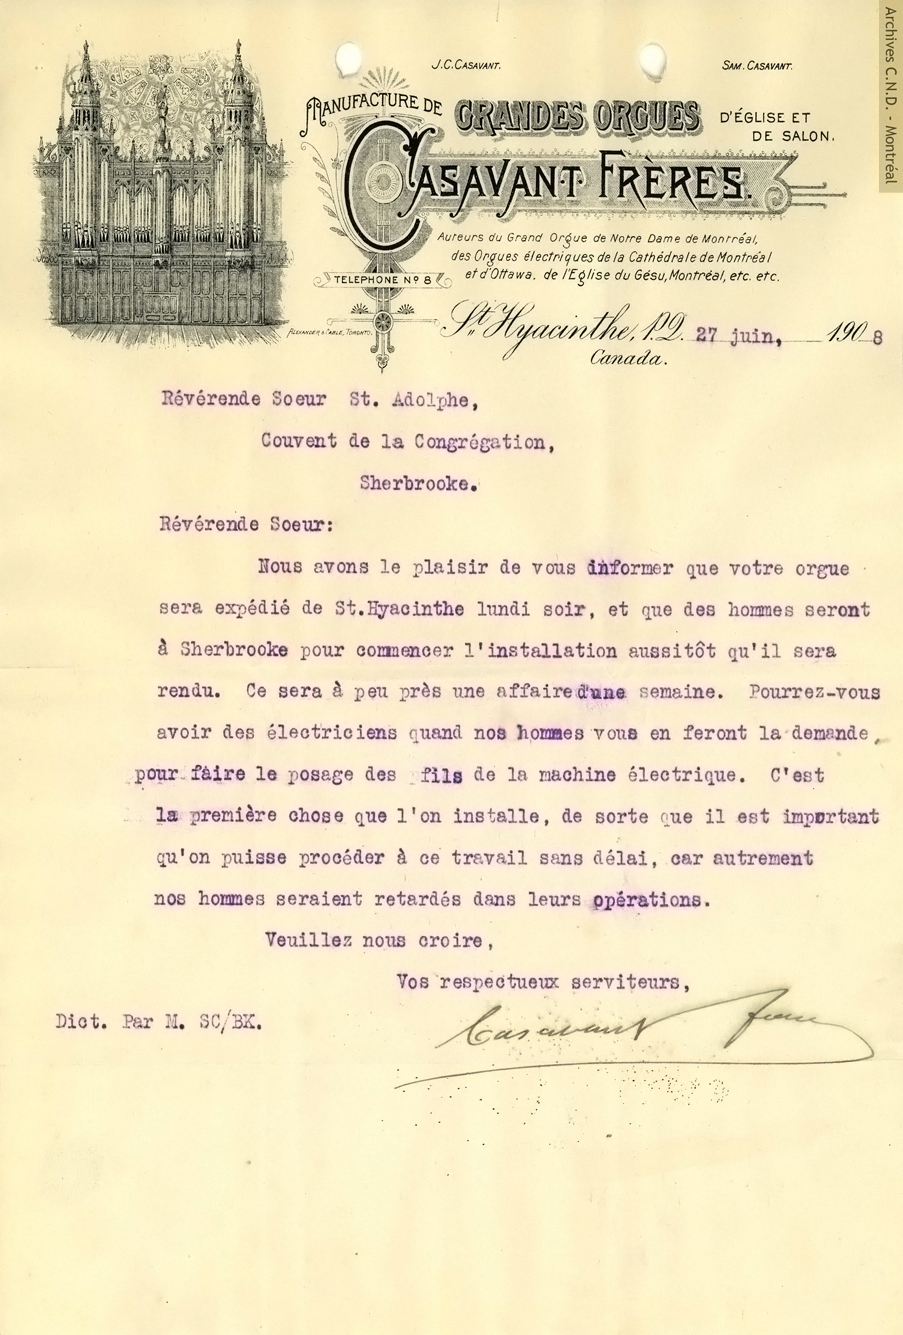 Letter from the Casavant brothers regarding the shipping of the organ ordered for Mont Notre-Dame Chapel